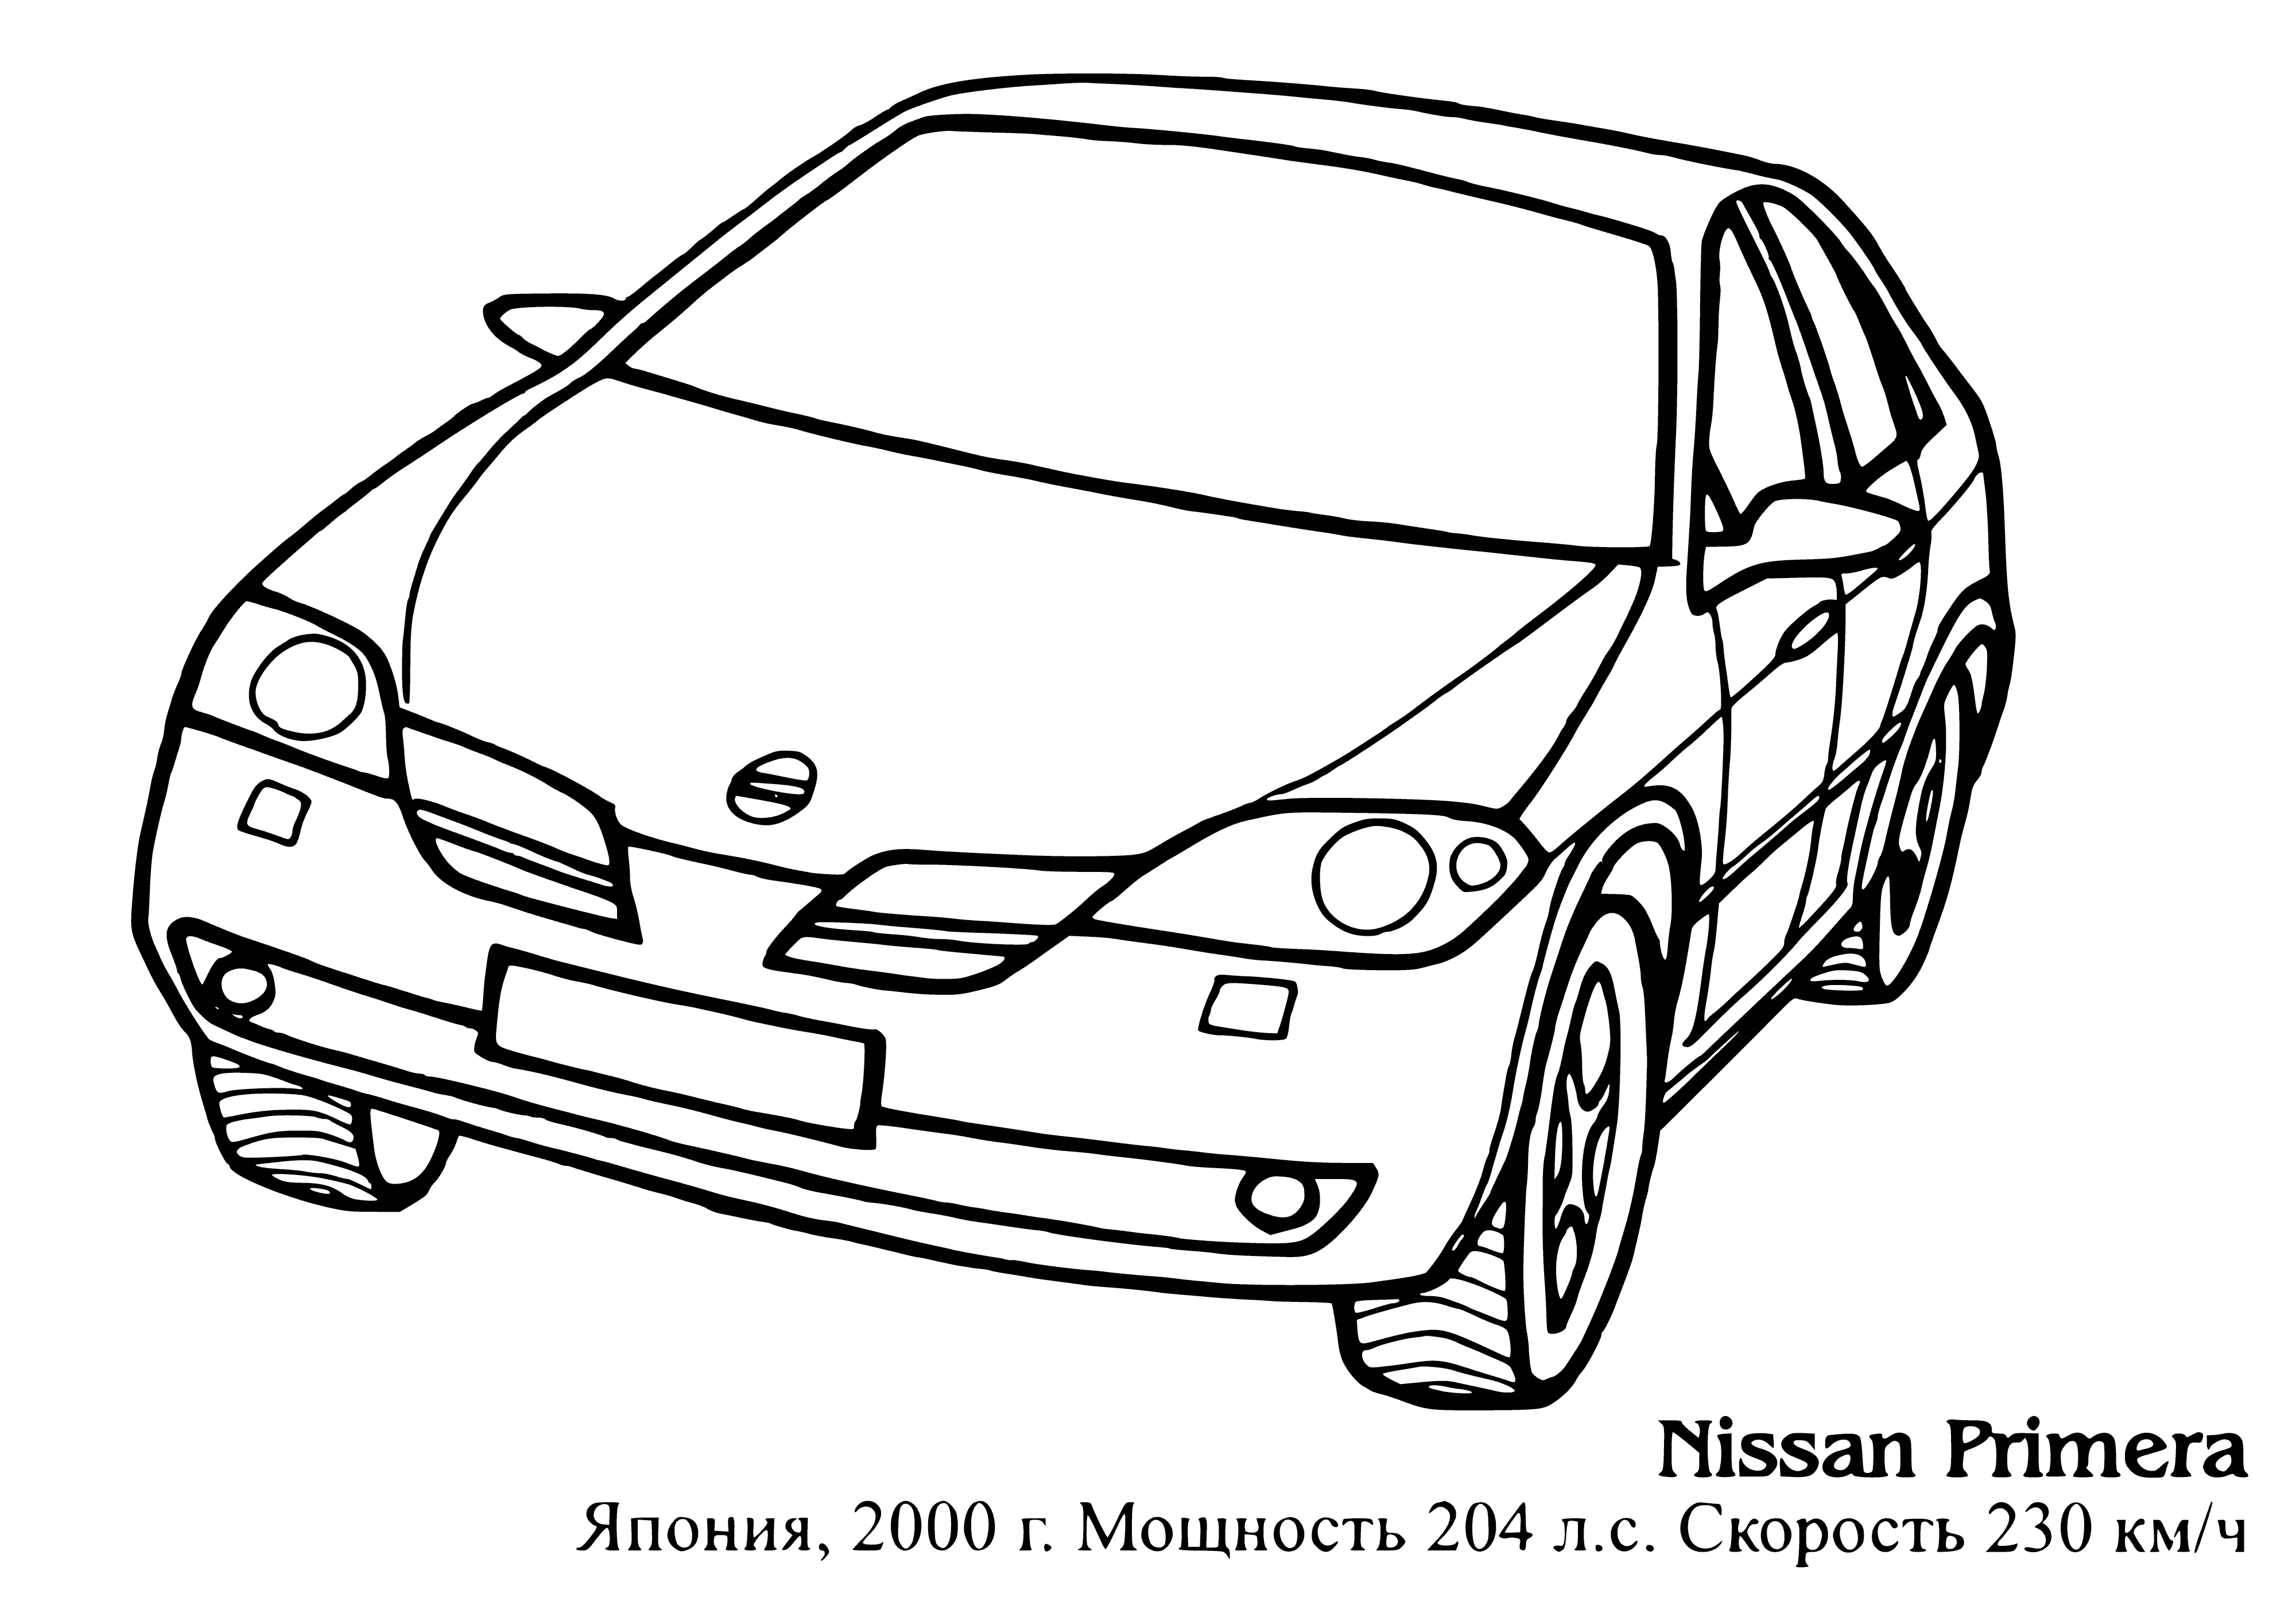 coloring page: Nissan is a Japanese automaker known for sporty designs and affordability; it offers models like the 370Z Coupe, Leaf electric hatchback, Pathfinder SUV, and Frontier pickup truck.